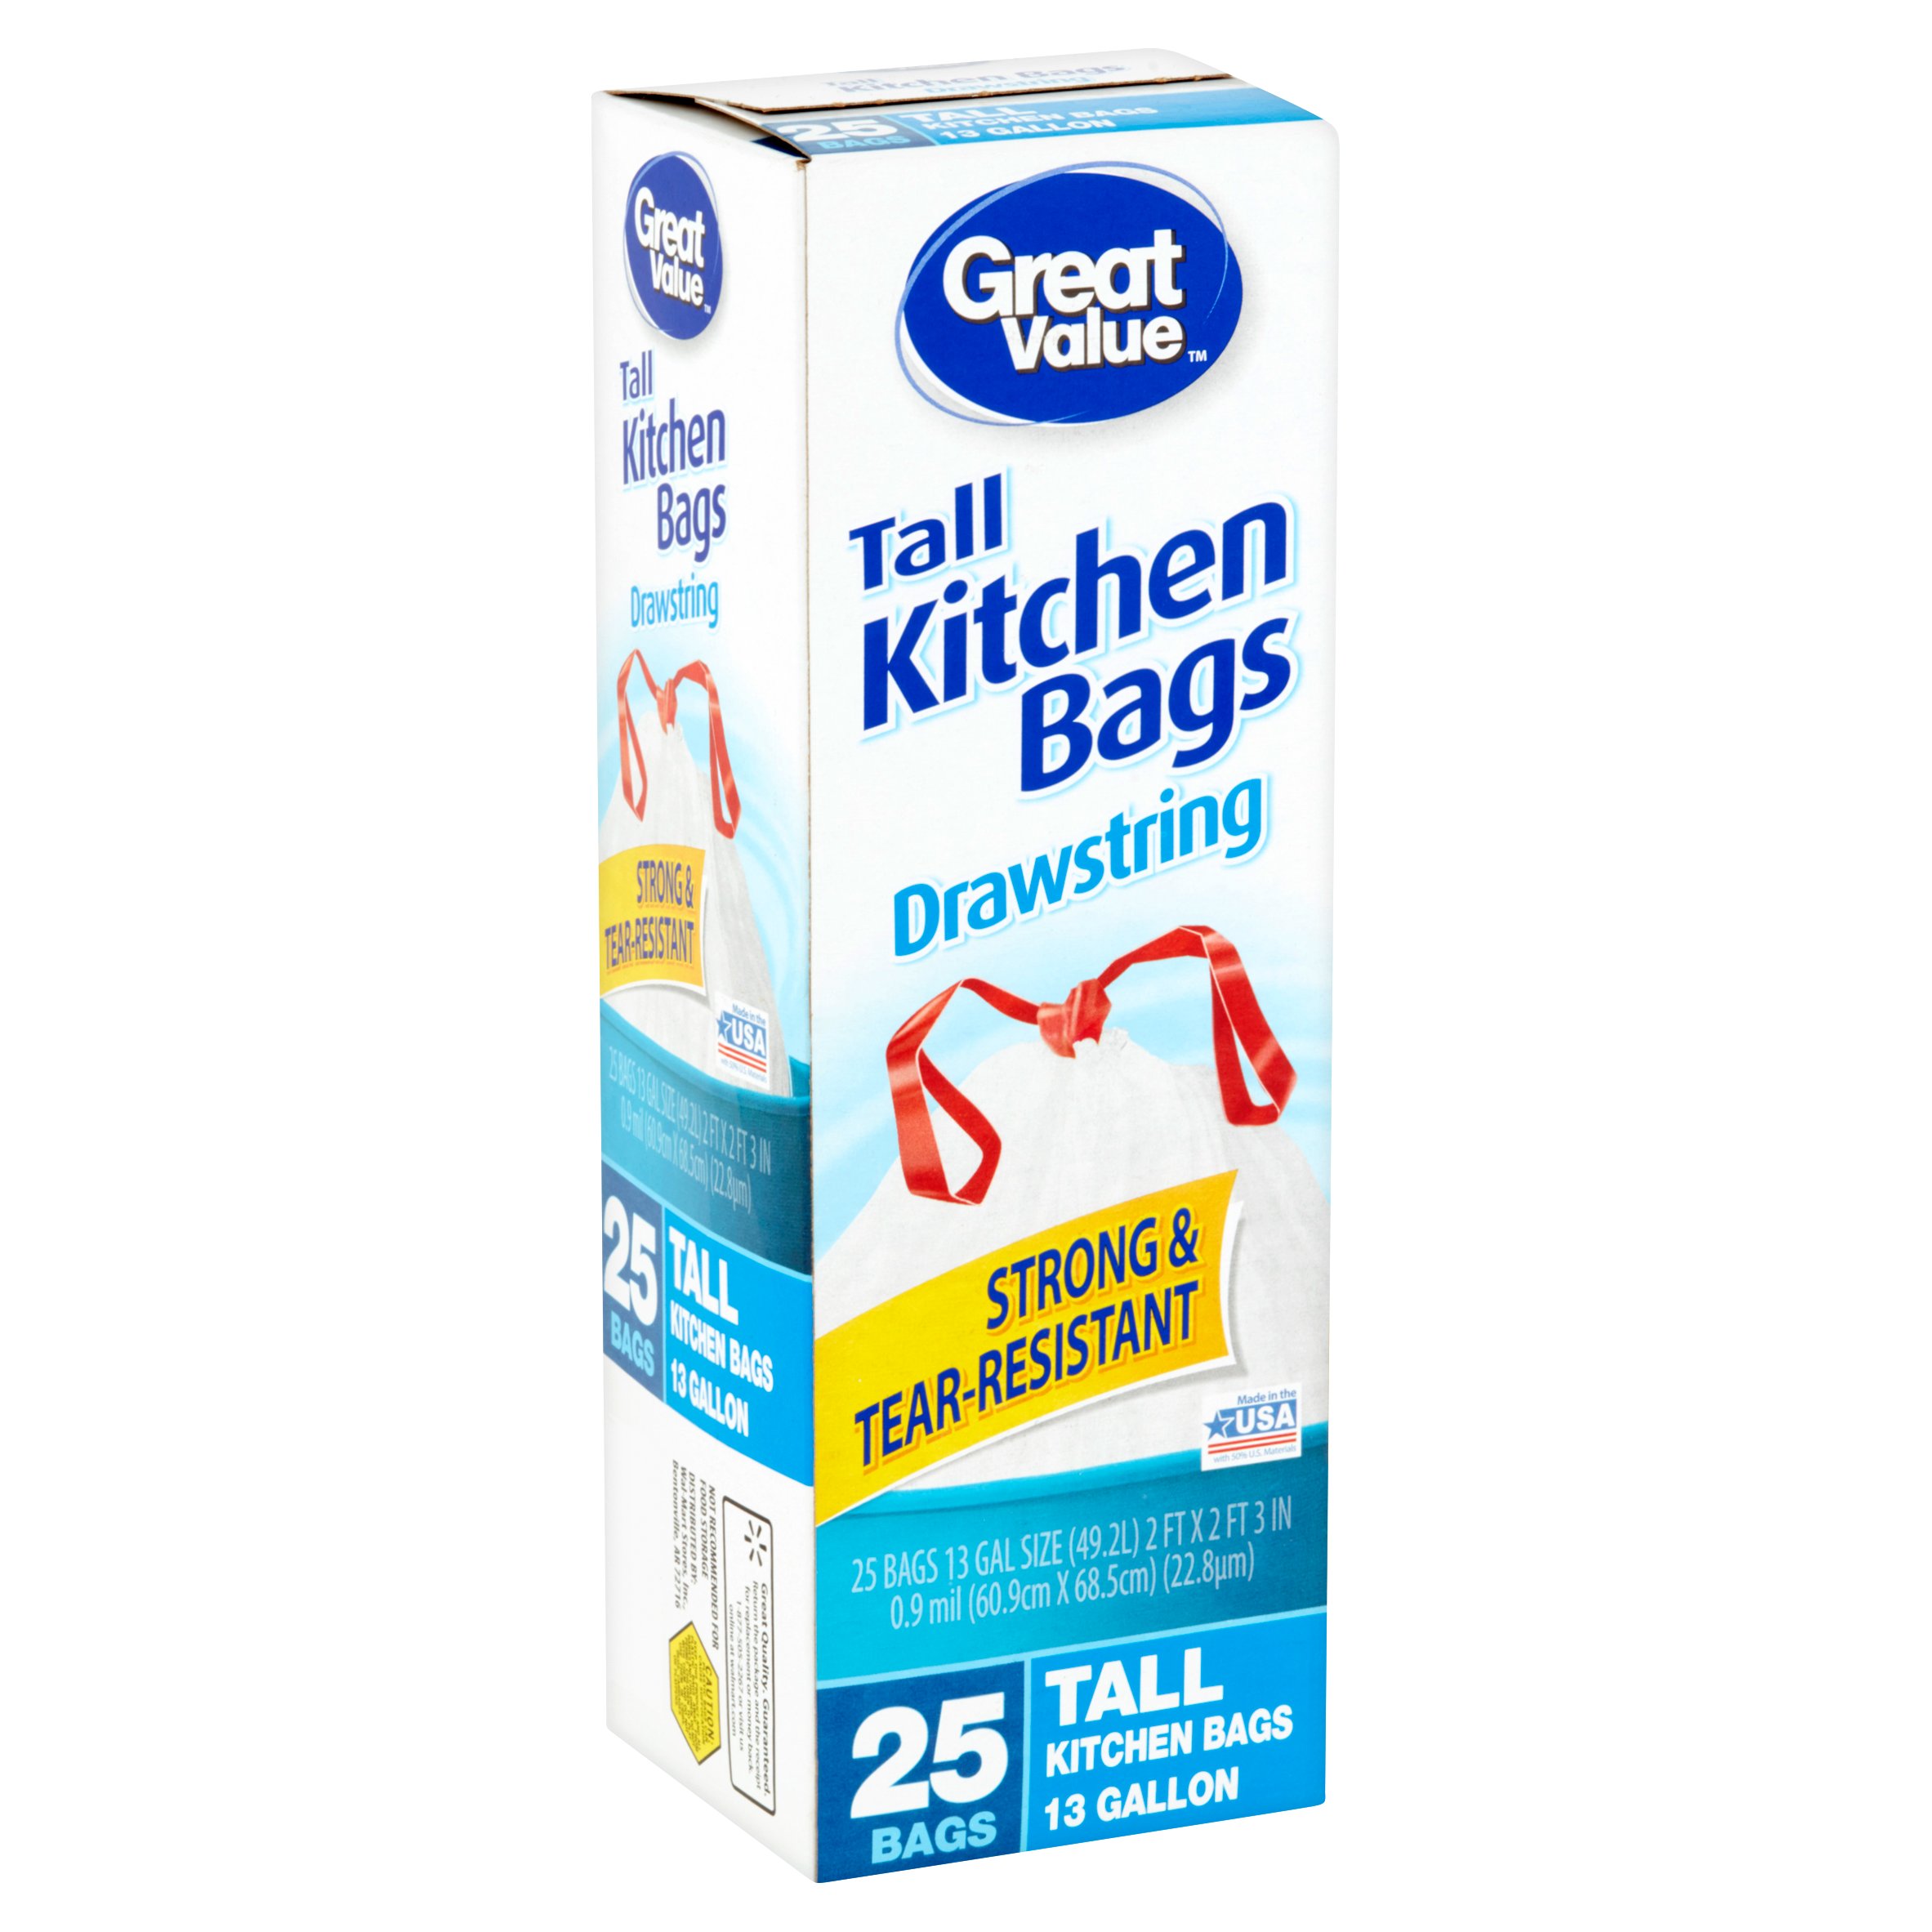 Great Value Tall Kitchen Drawstring Trash Bags, 13 Gallon, 25 Count - image 4 of 5